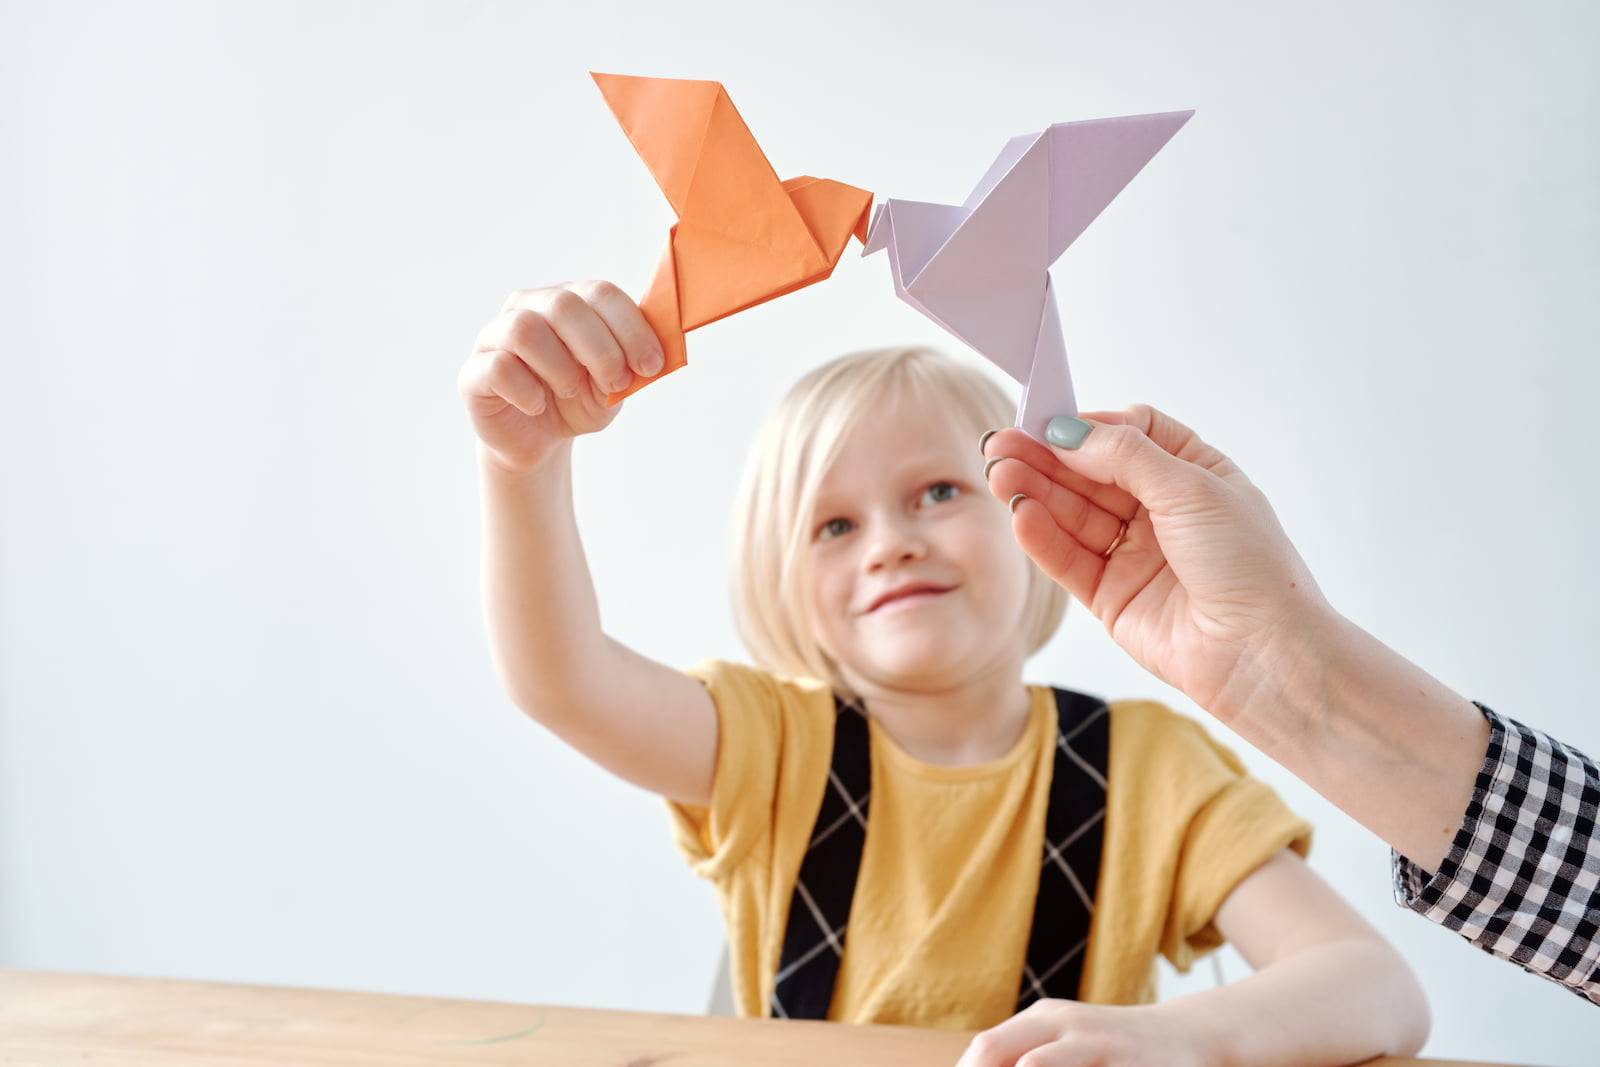 Girl playing with origami doves